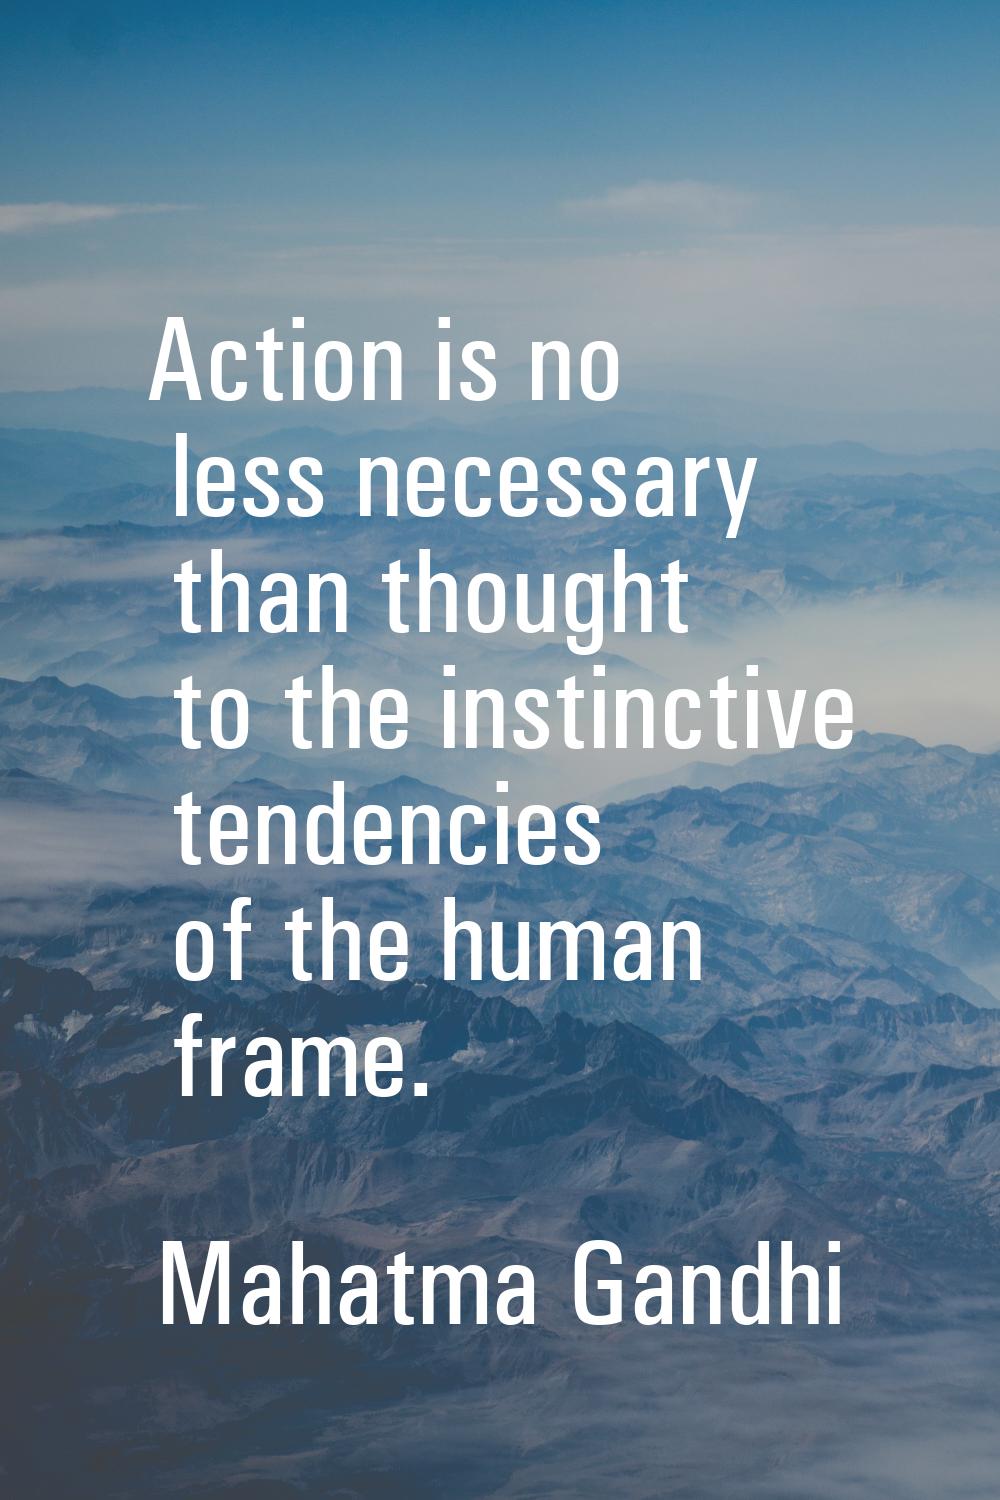 Action is no less necessary than thought to the instinctive tendencies of the human frame.